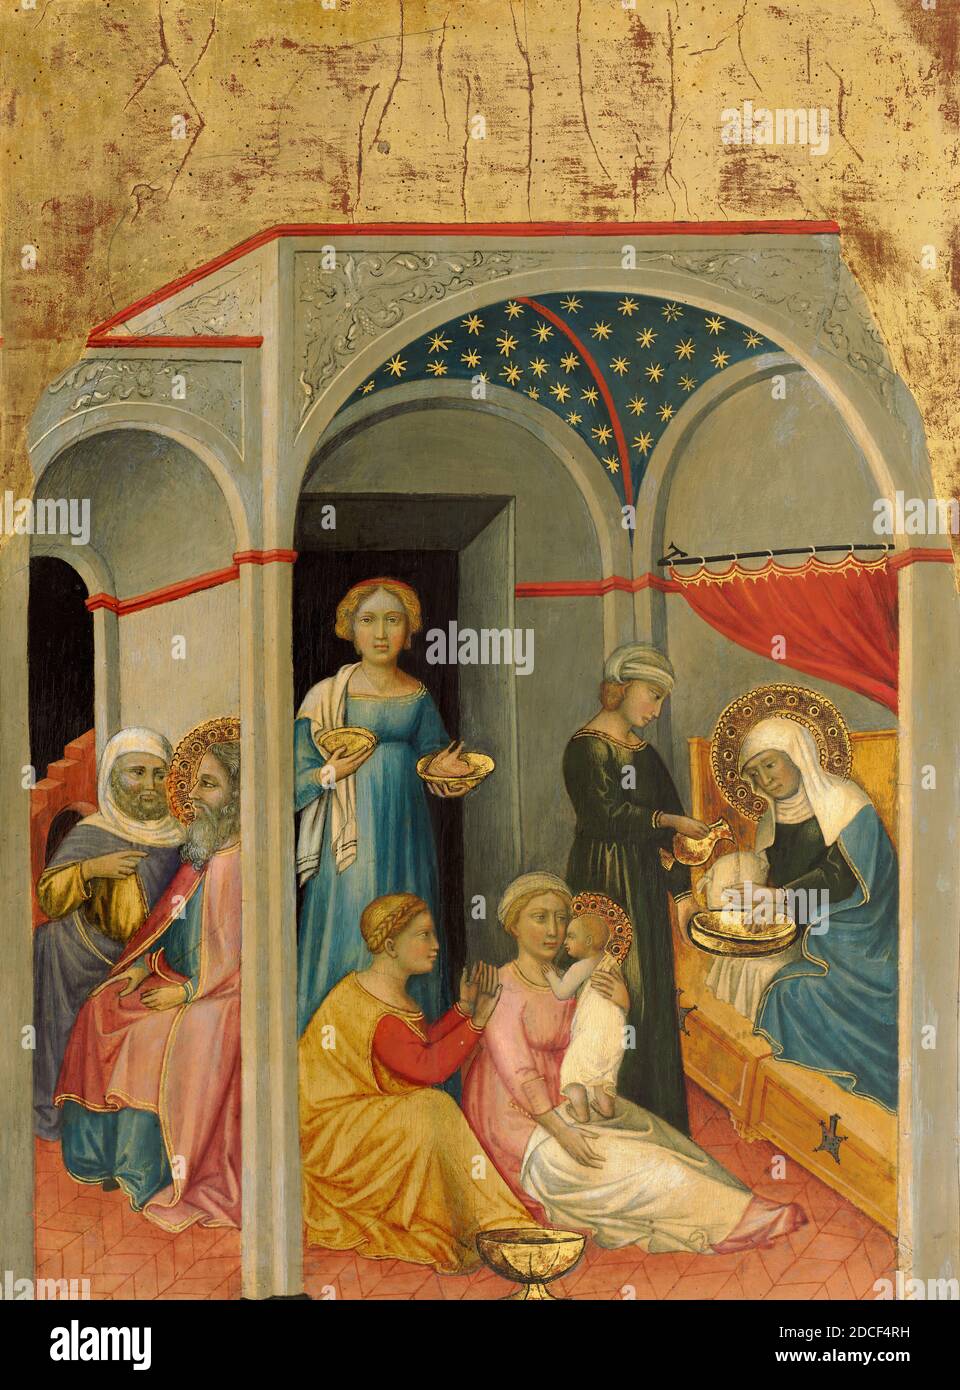 Andrea di Bartolo, (painter), Sienese, active from 1389 - died 1428, The Nativity of the Virgin, c. 1400/1405, tempera on poplar panel, painted surface: 44.2 × 32.5 cm (17 3/8 × 12 13/16 in.), overall: 46.7 × 33.9 × 0.6 cm (18 3/8 × 13 3/8 × 1/4 in.), framed: 48.3 x 36.8 x 4.1 cm (19 x 14 1/2 x 1 5/8 in Stock Photo